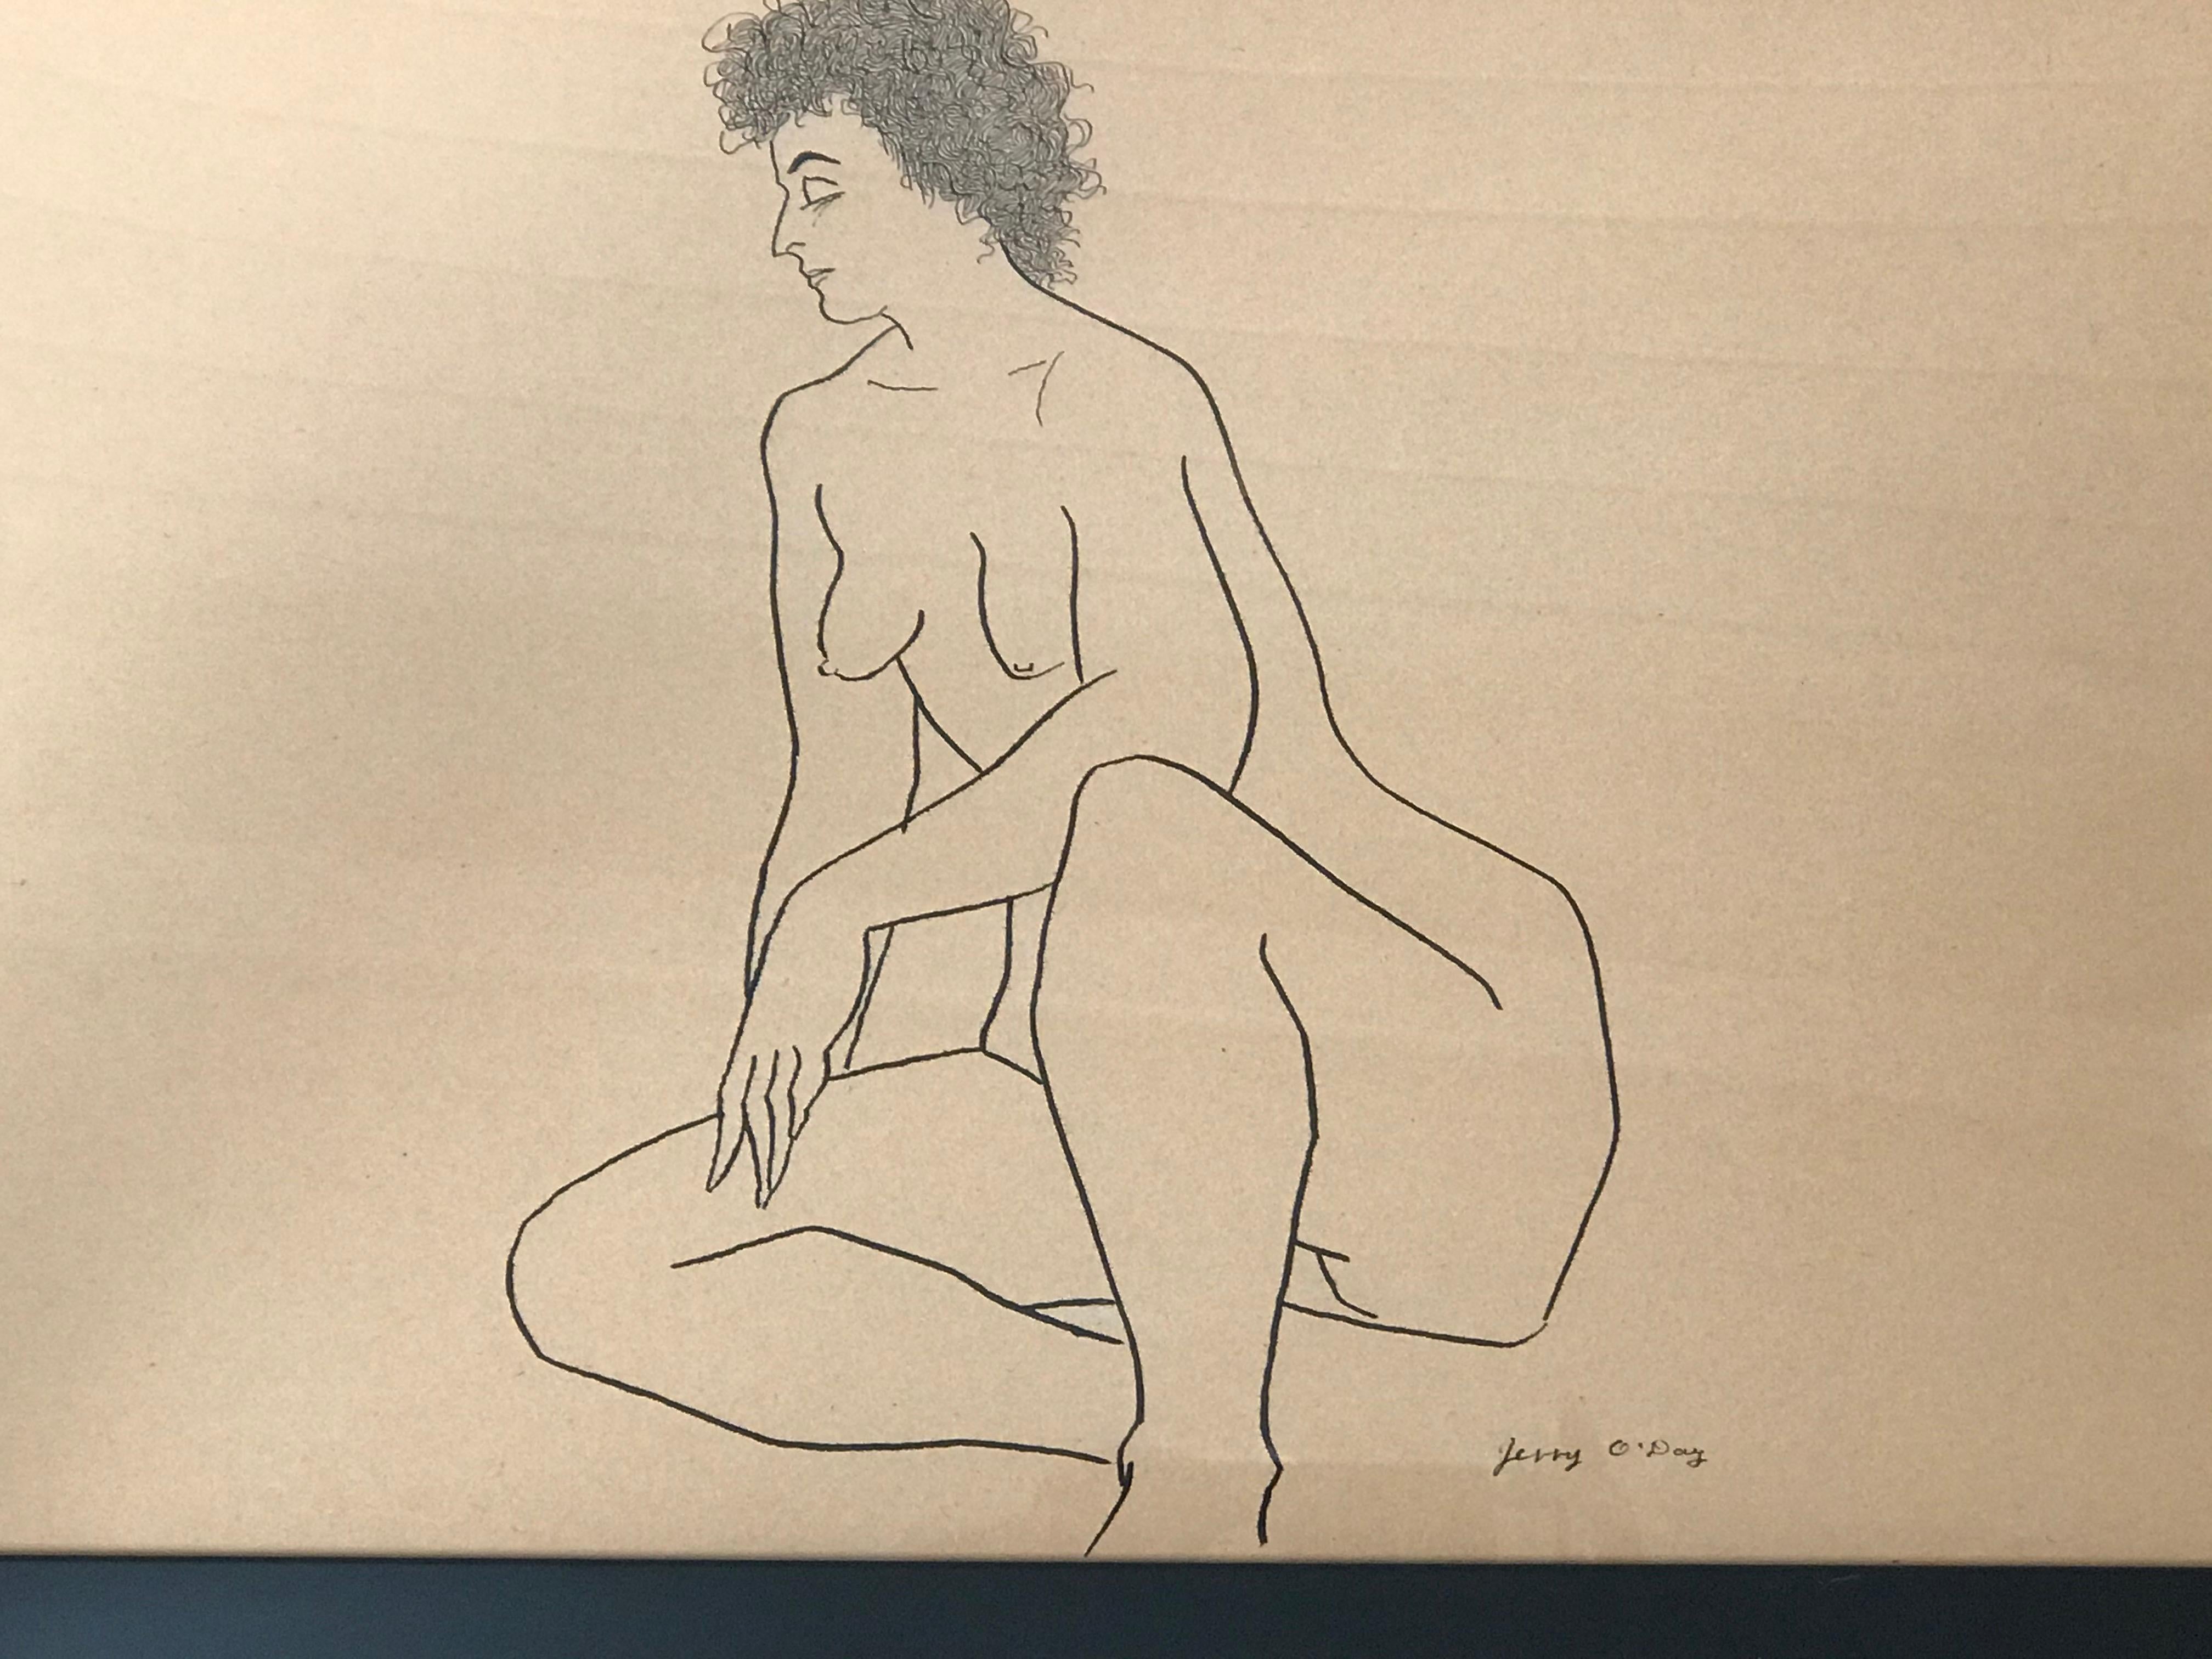 Gracious nude of a woman drawn with ink on craft paper. It is signed by the artist. The artwork sits in a simple black stained wood frame.
Jerry O'Day is also known as Geraldine Heib. Born in Oakland, CA on June 17, 1912, Geraldine Heib assumed the